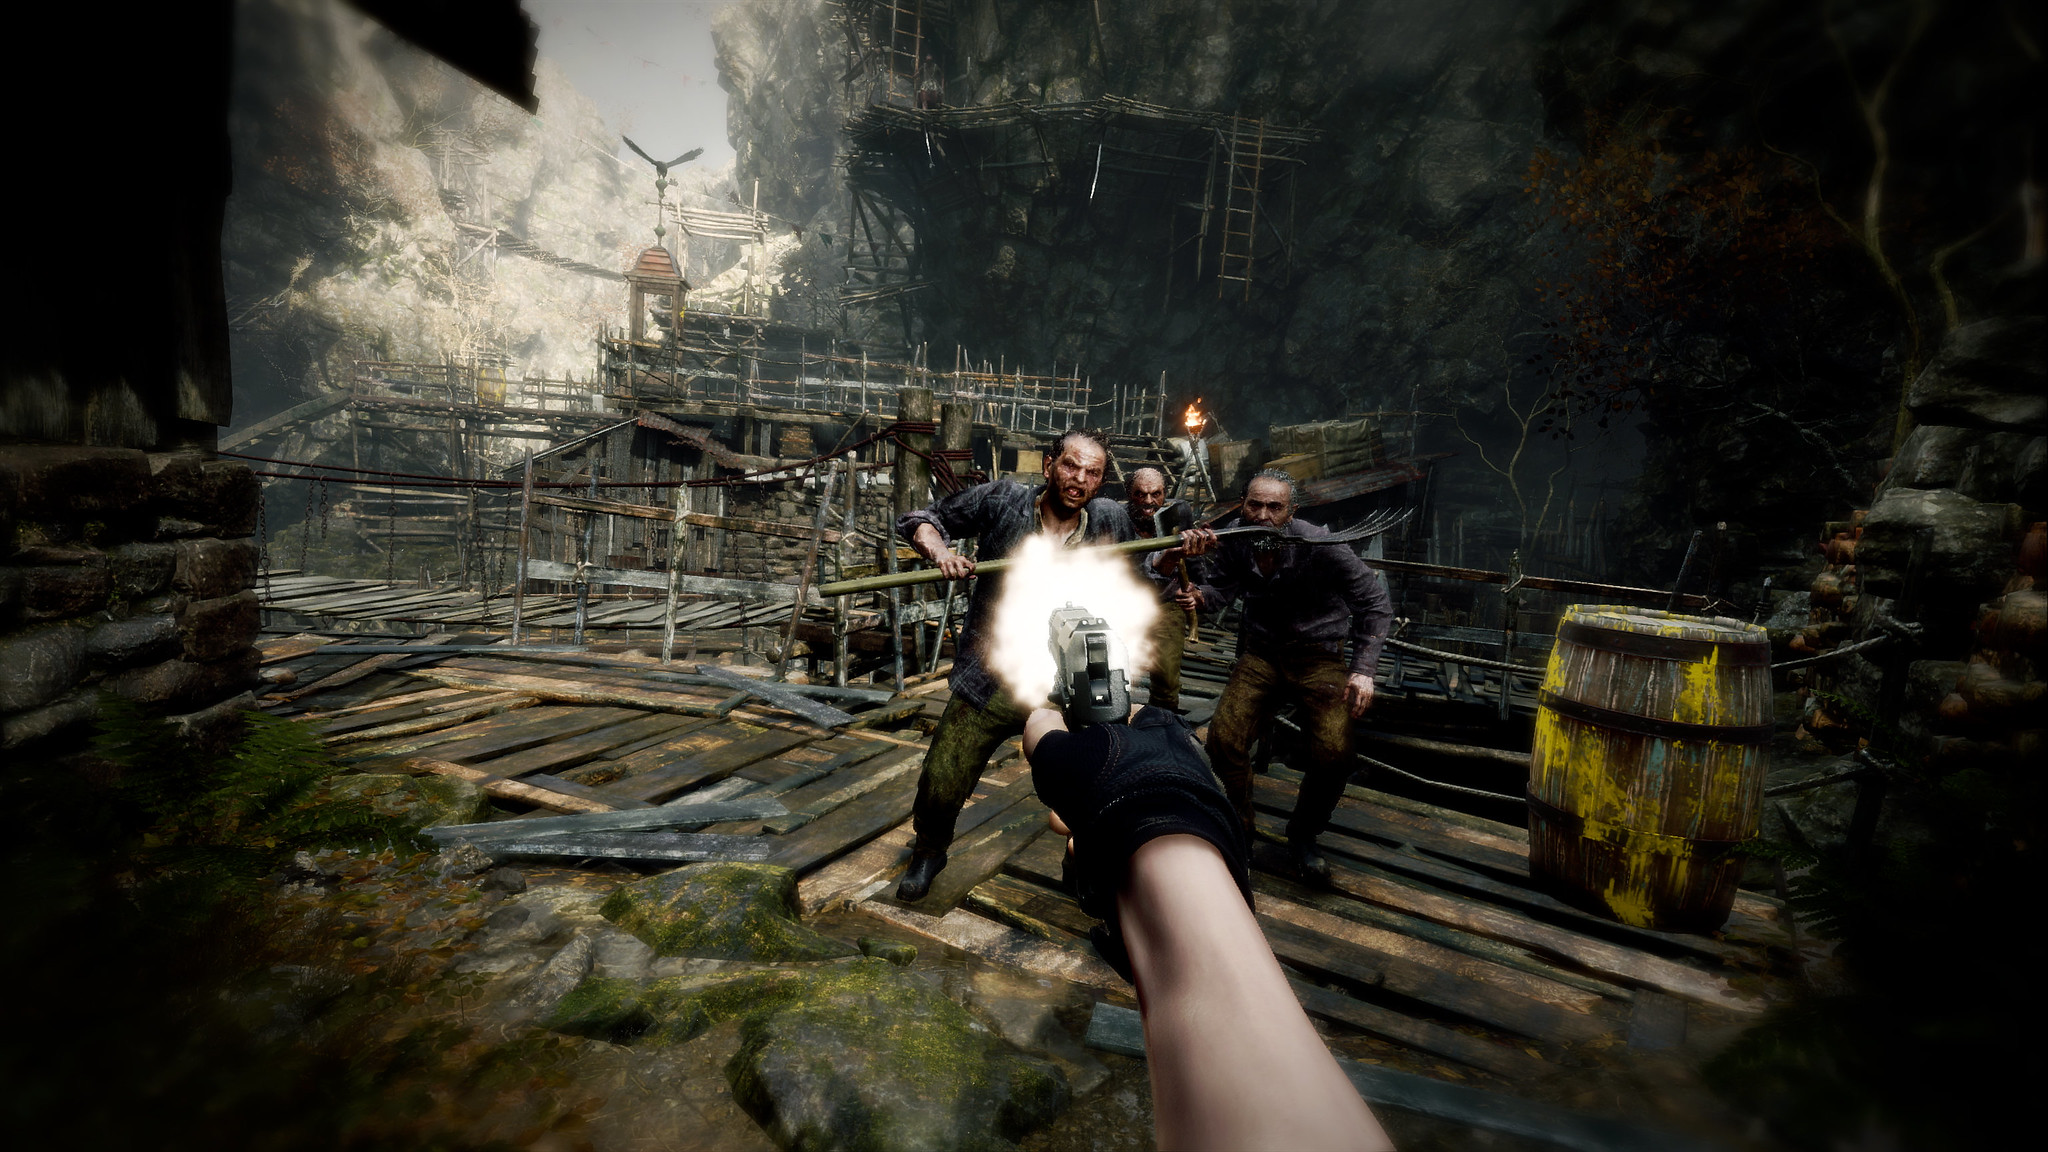 In first person view, the player raises and fires their handgun at approaching enemies.